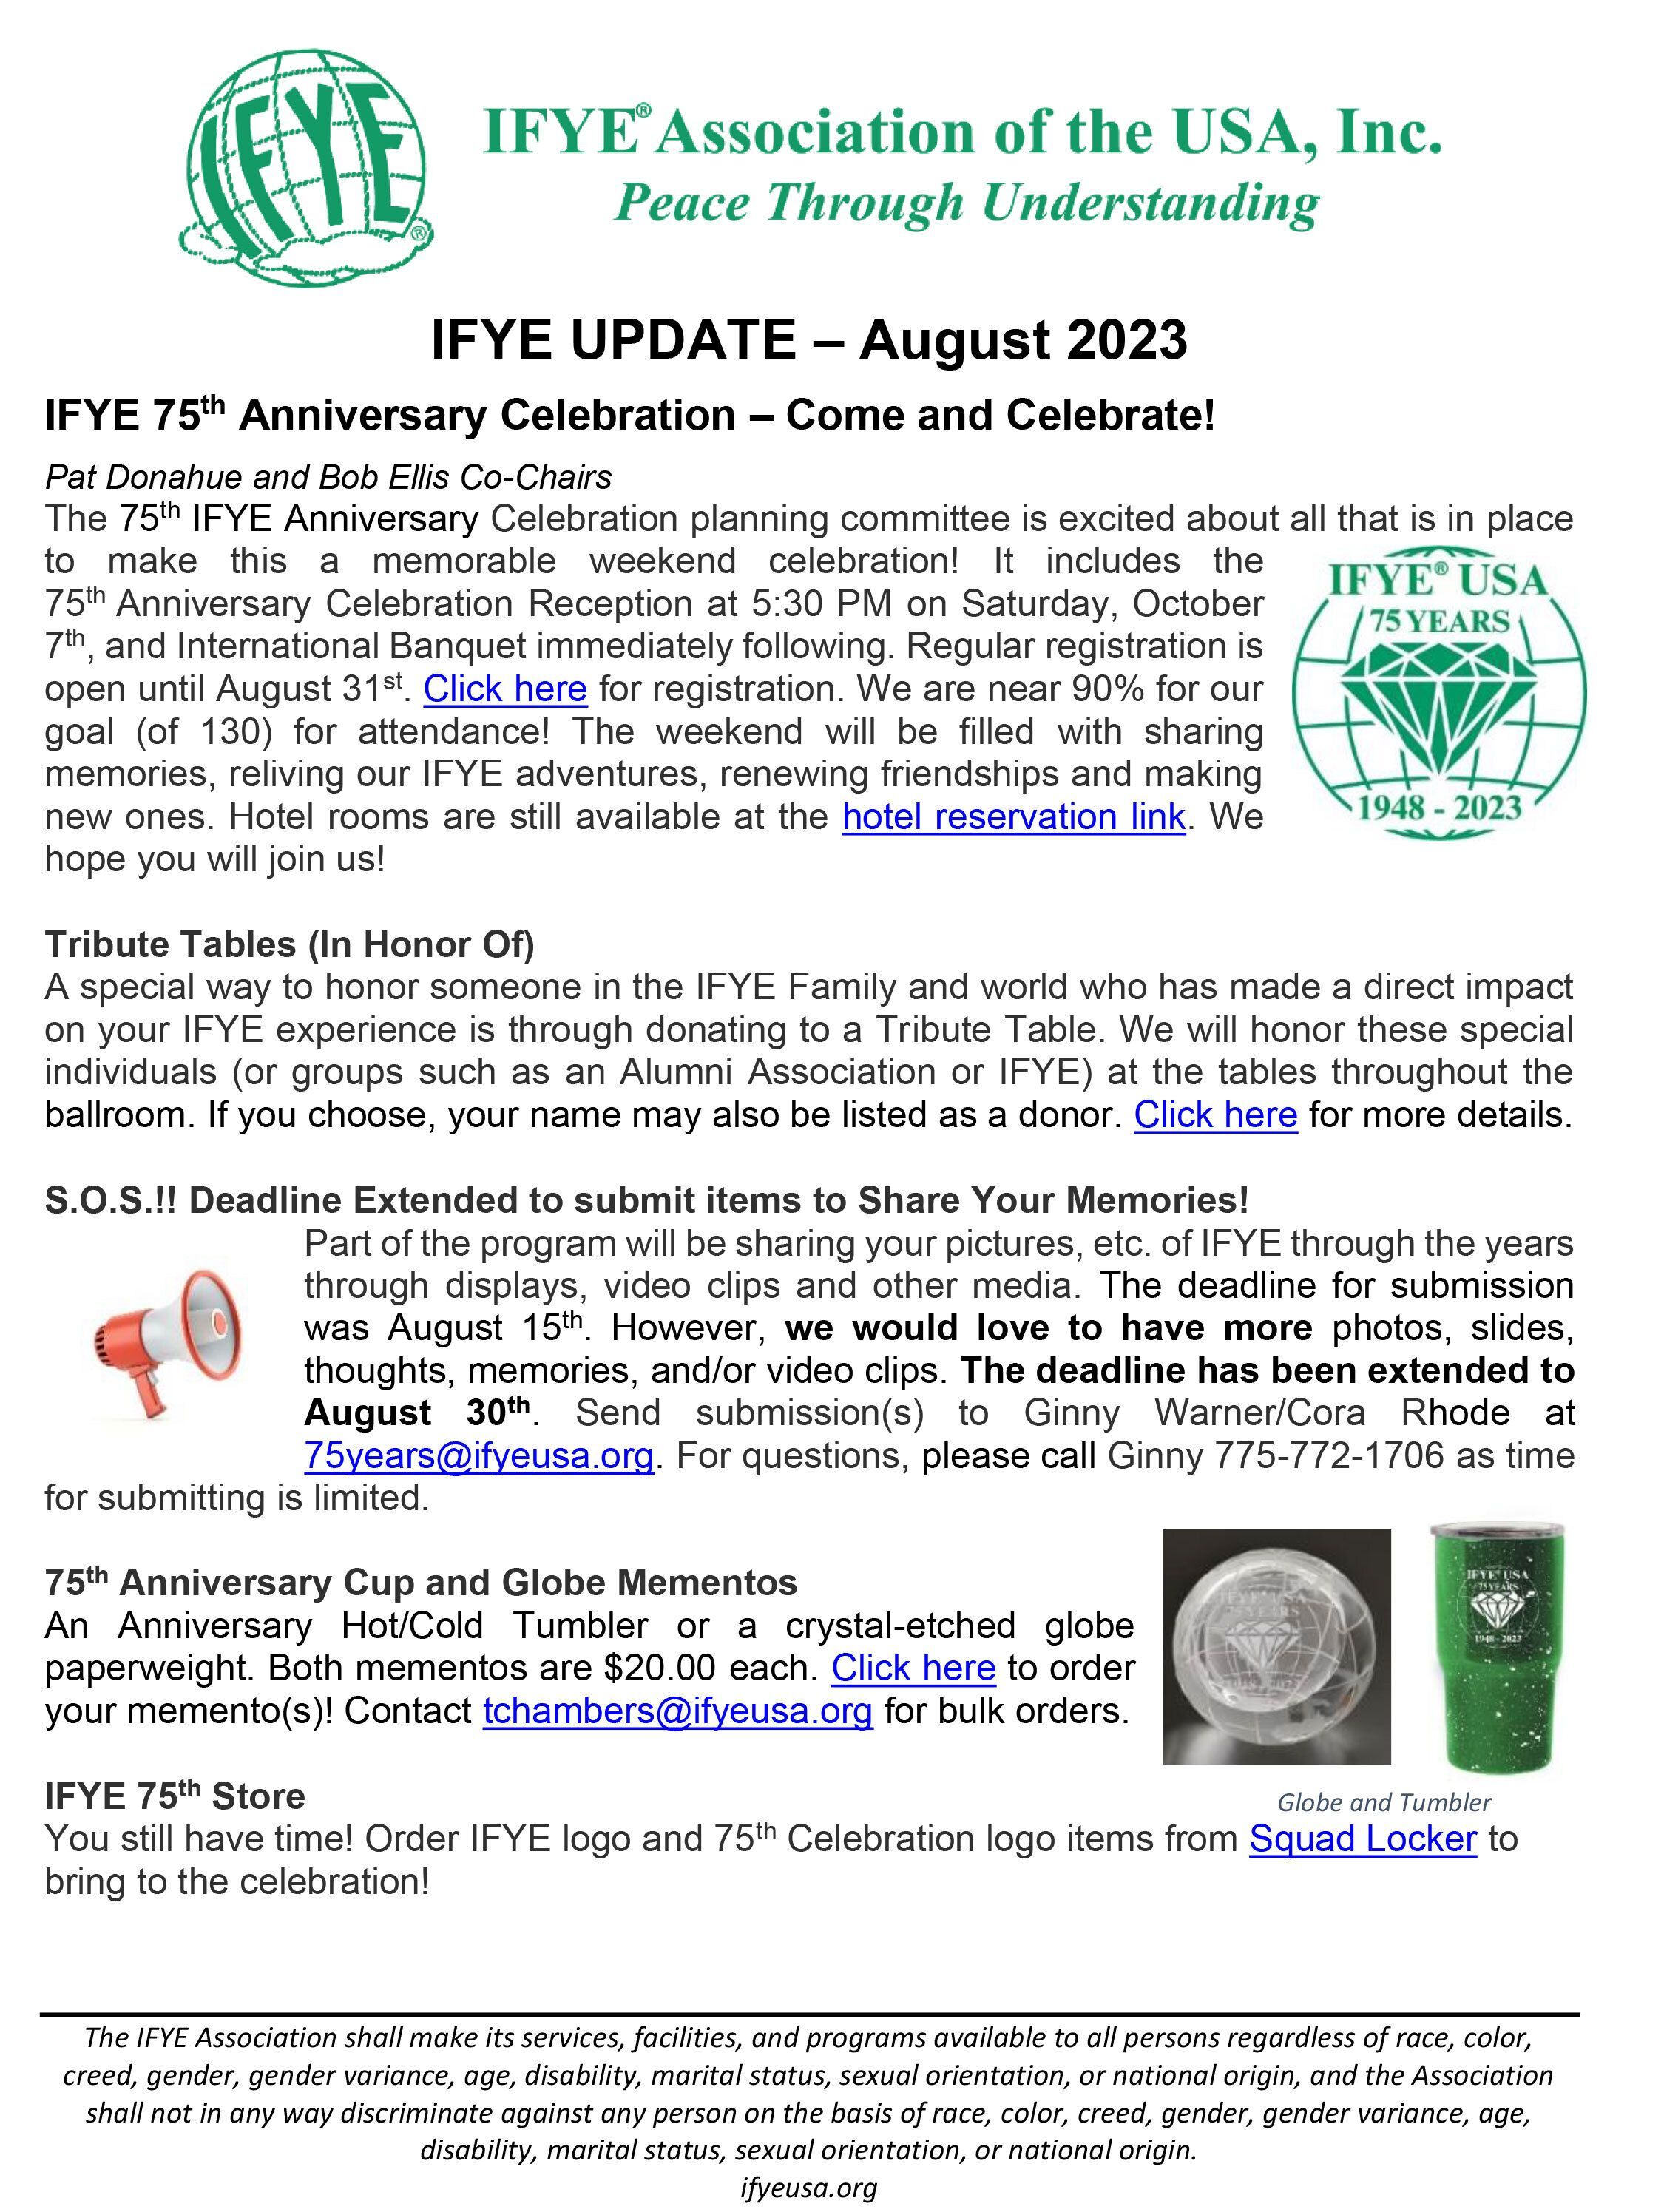 Read the August 2023 Update